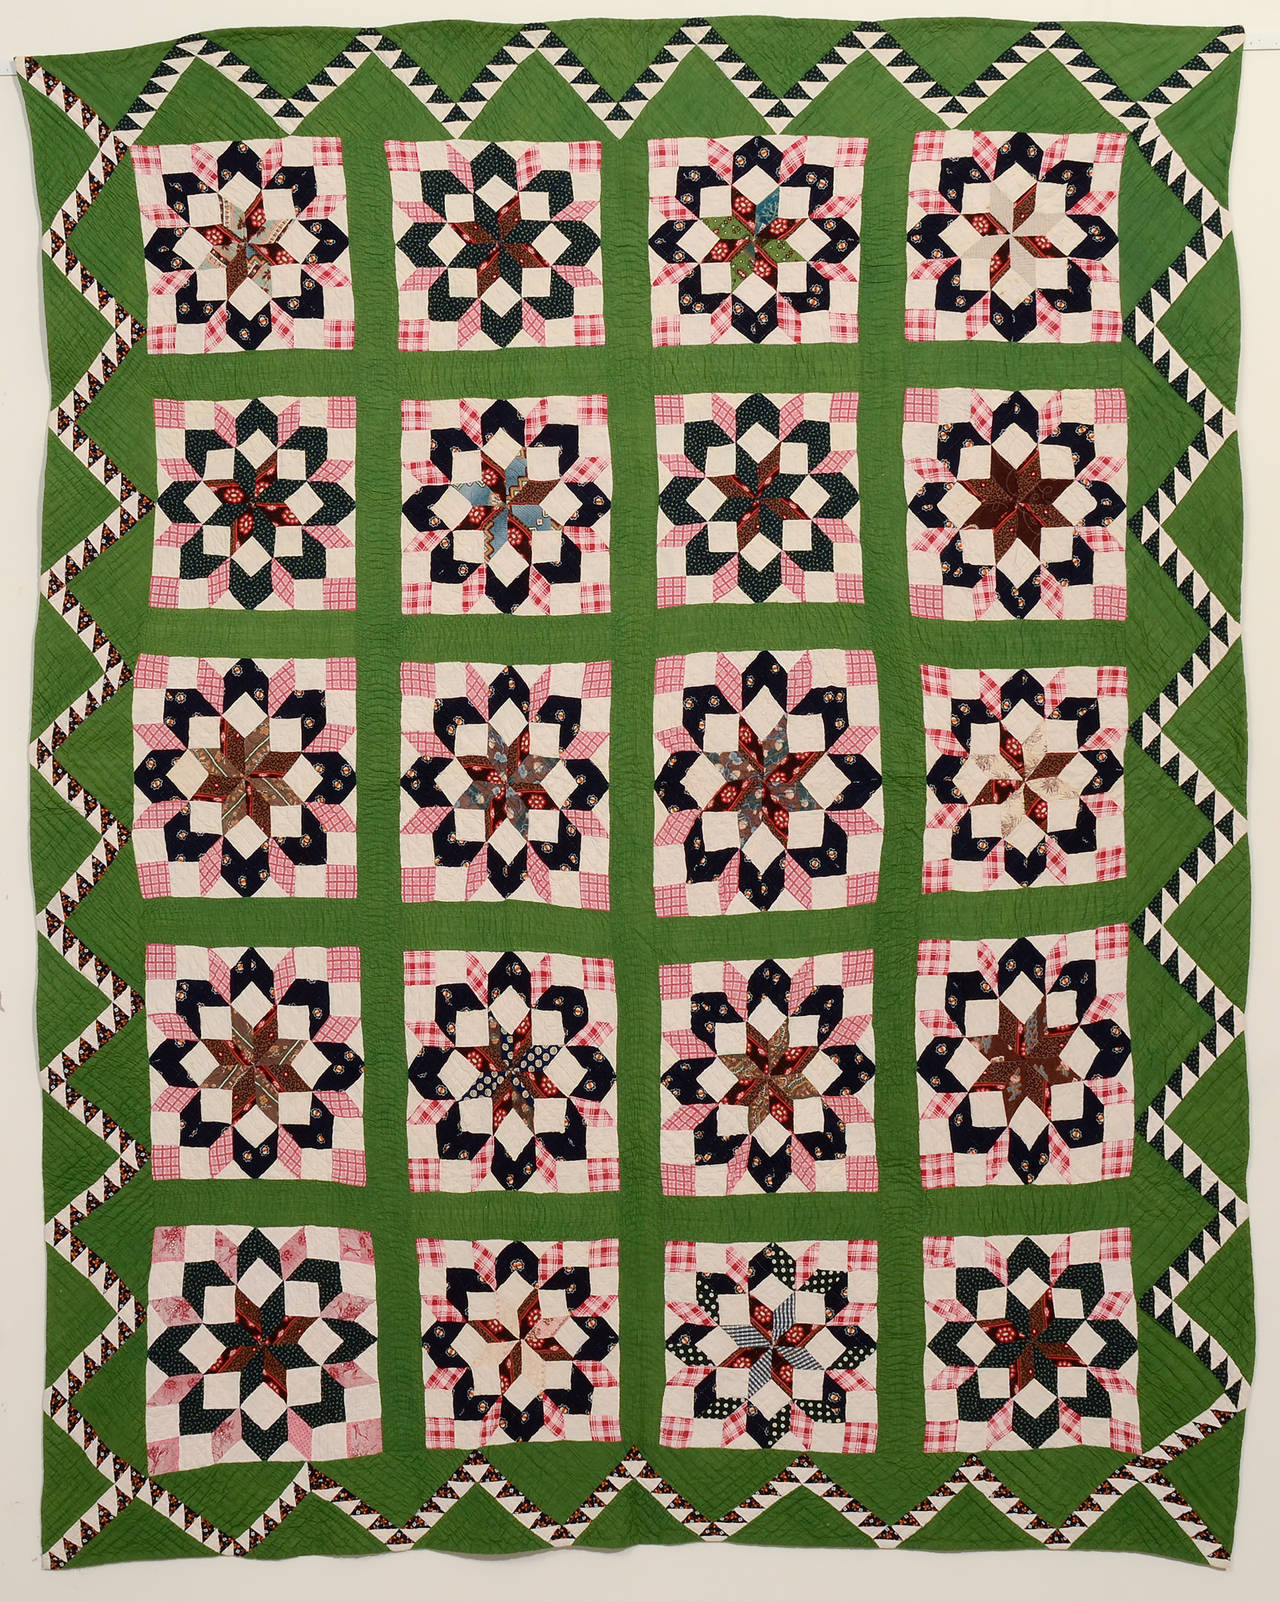 The use of color and fabric could not be better in this Carpenter's Wheel quilt. The green background beautifully sets off the deep indigo and rose tones while the pink diamonds give a bursting effect to each star. And who could ask for a better